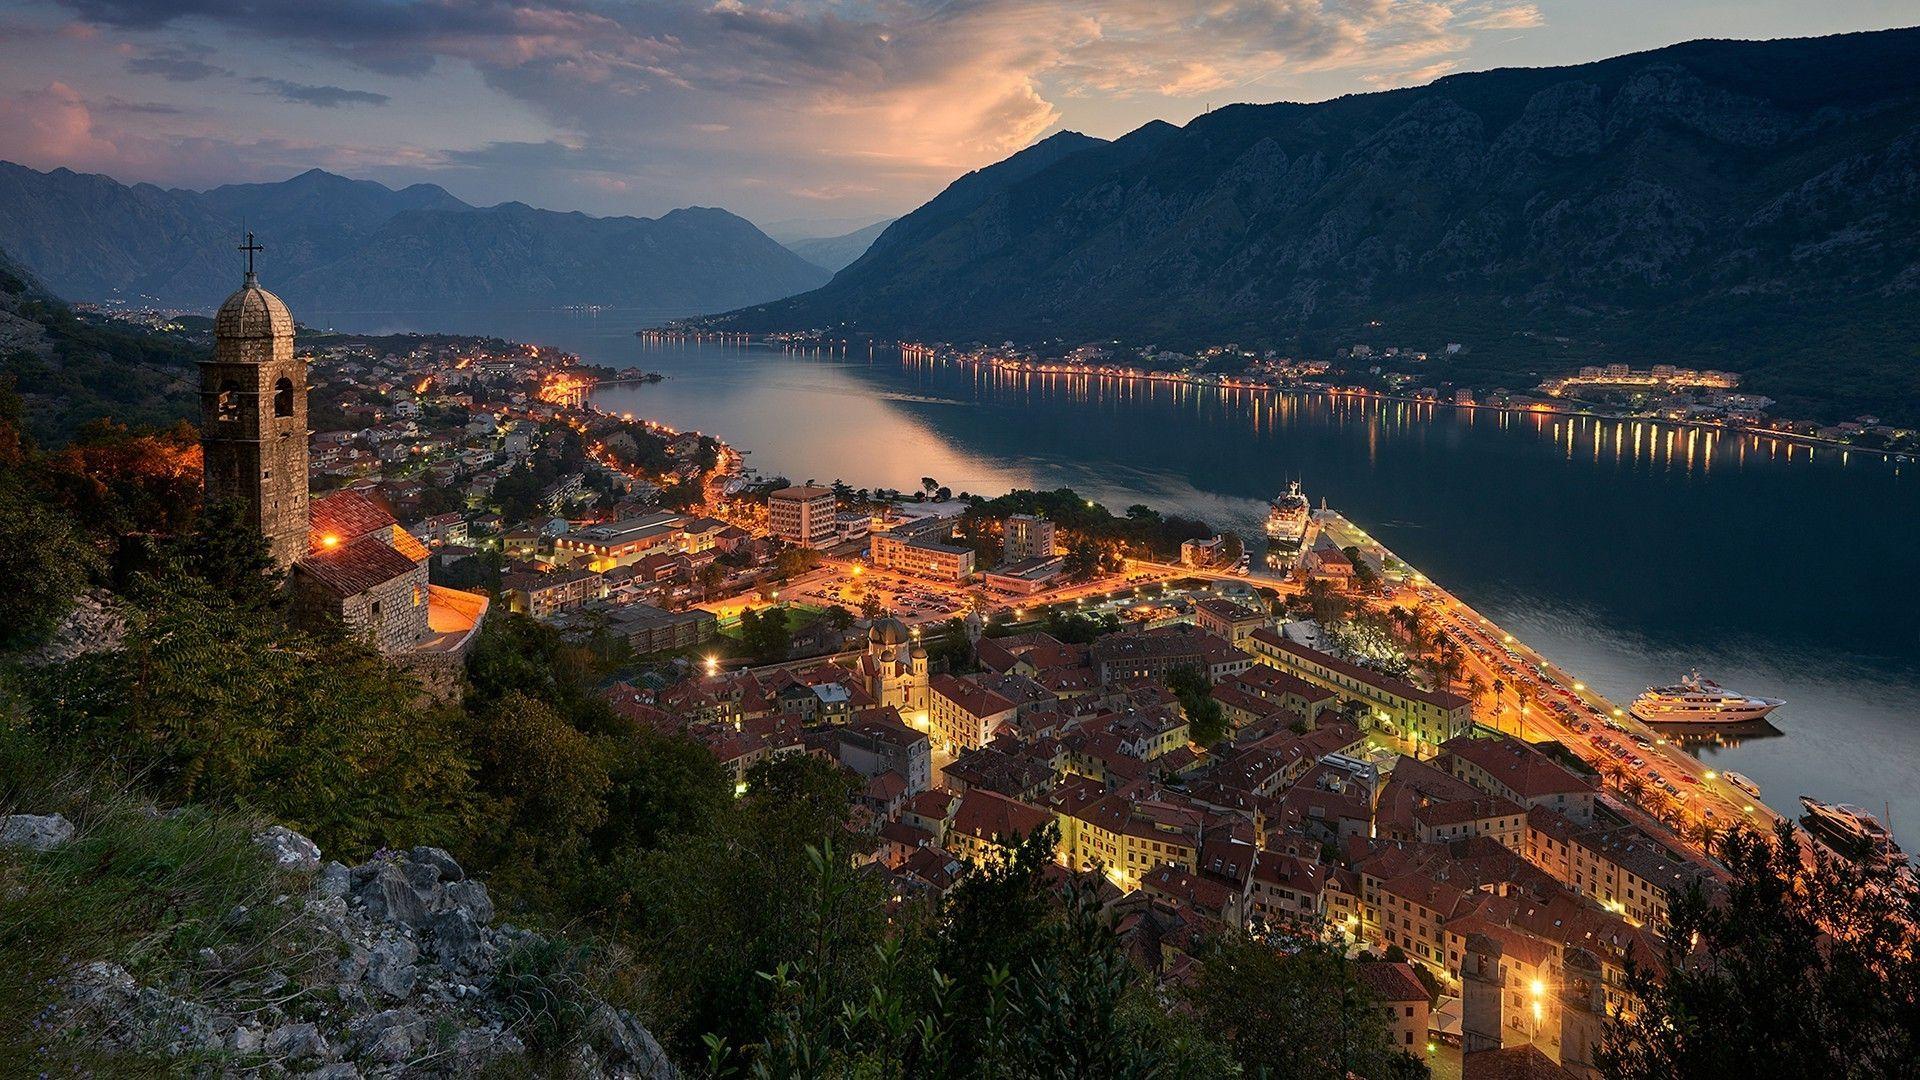 450 Montenegro Pictures HD  Download Free Images on Unsplash